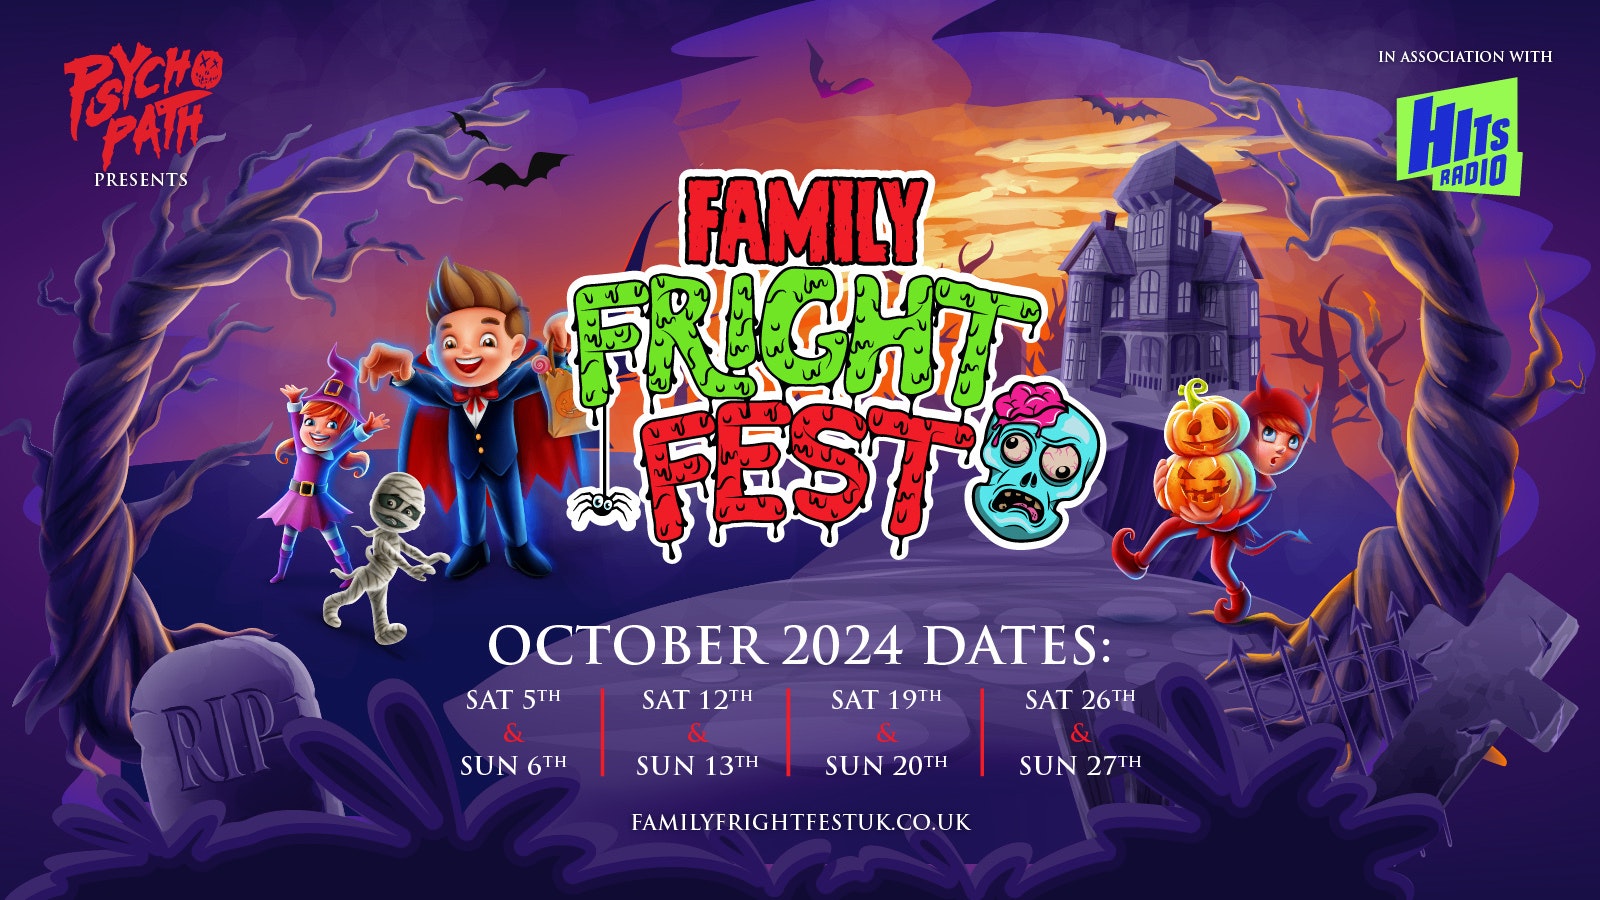 Family Fright Fest – Oct 26th